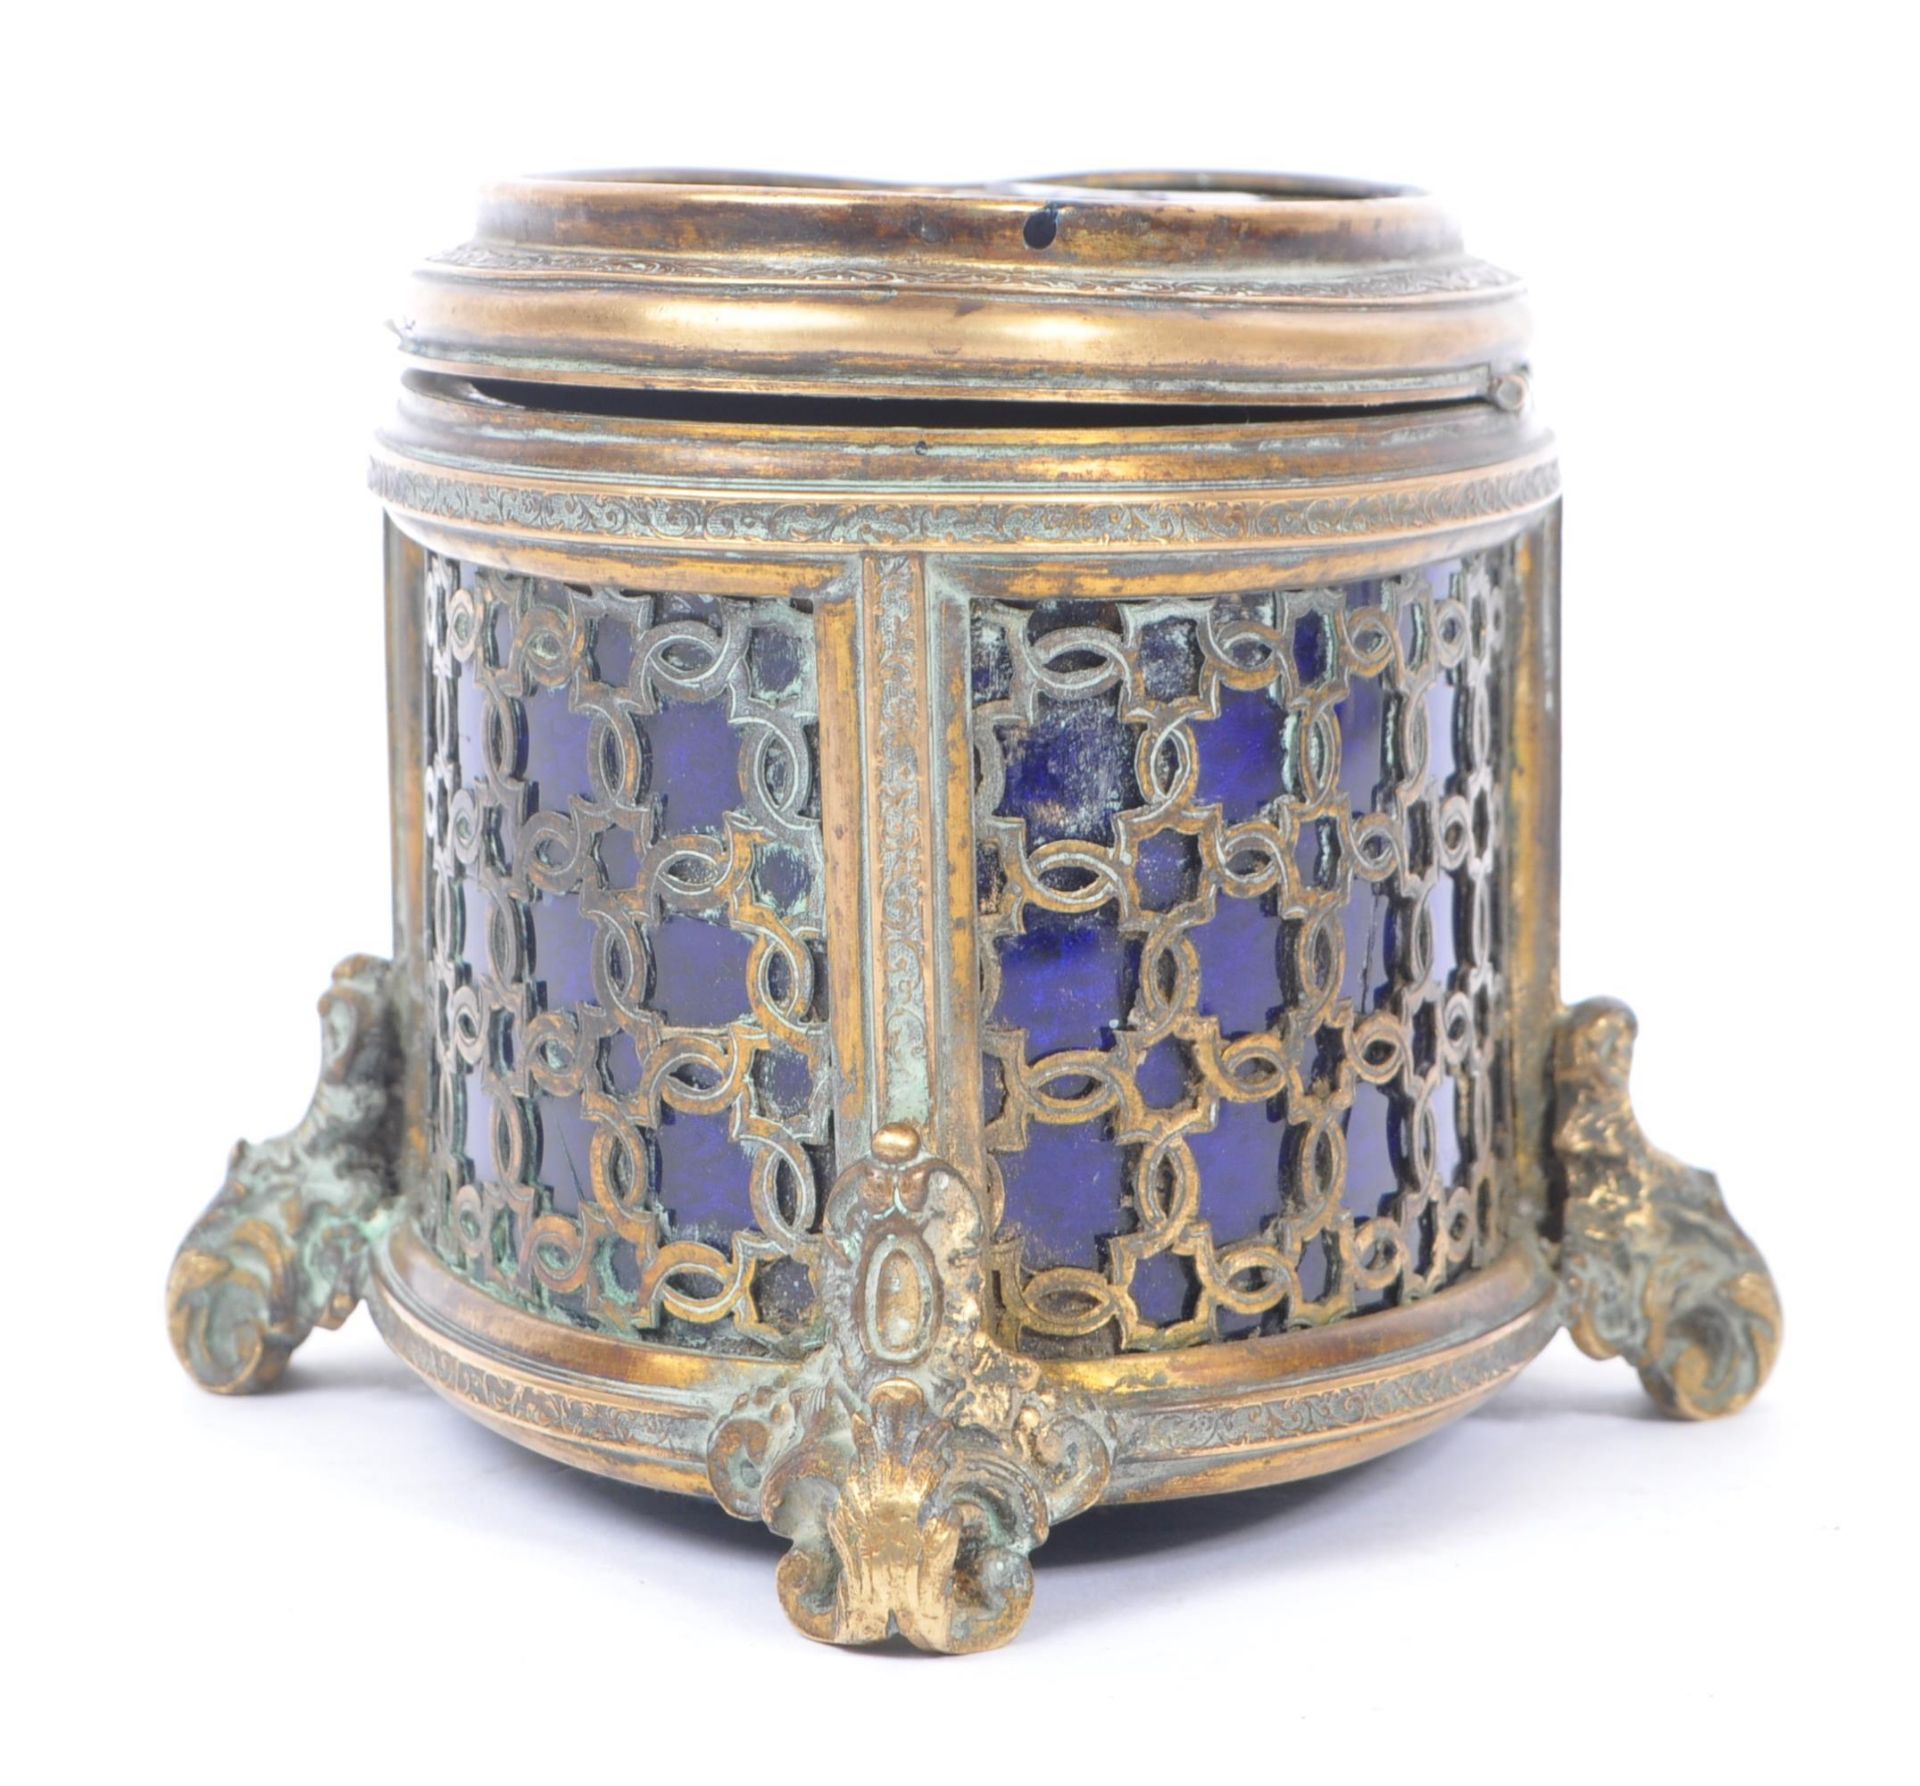 EARLY 20TH CENTURY BRASS AND BLUE GLASS TRINKET BOX - Image 4 of 6